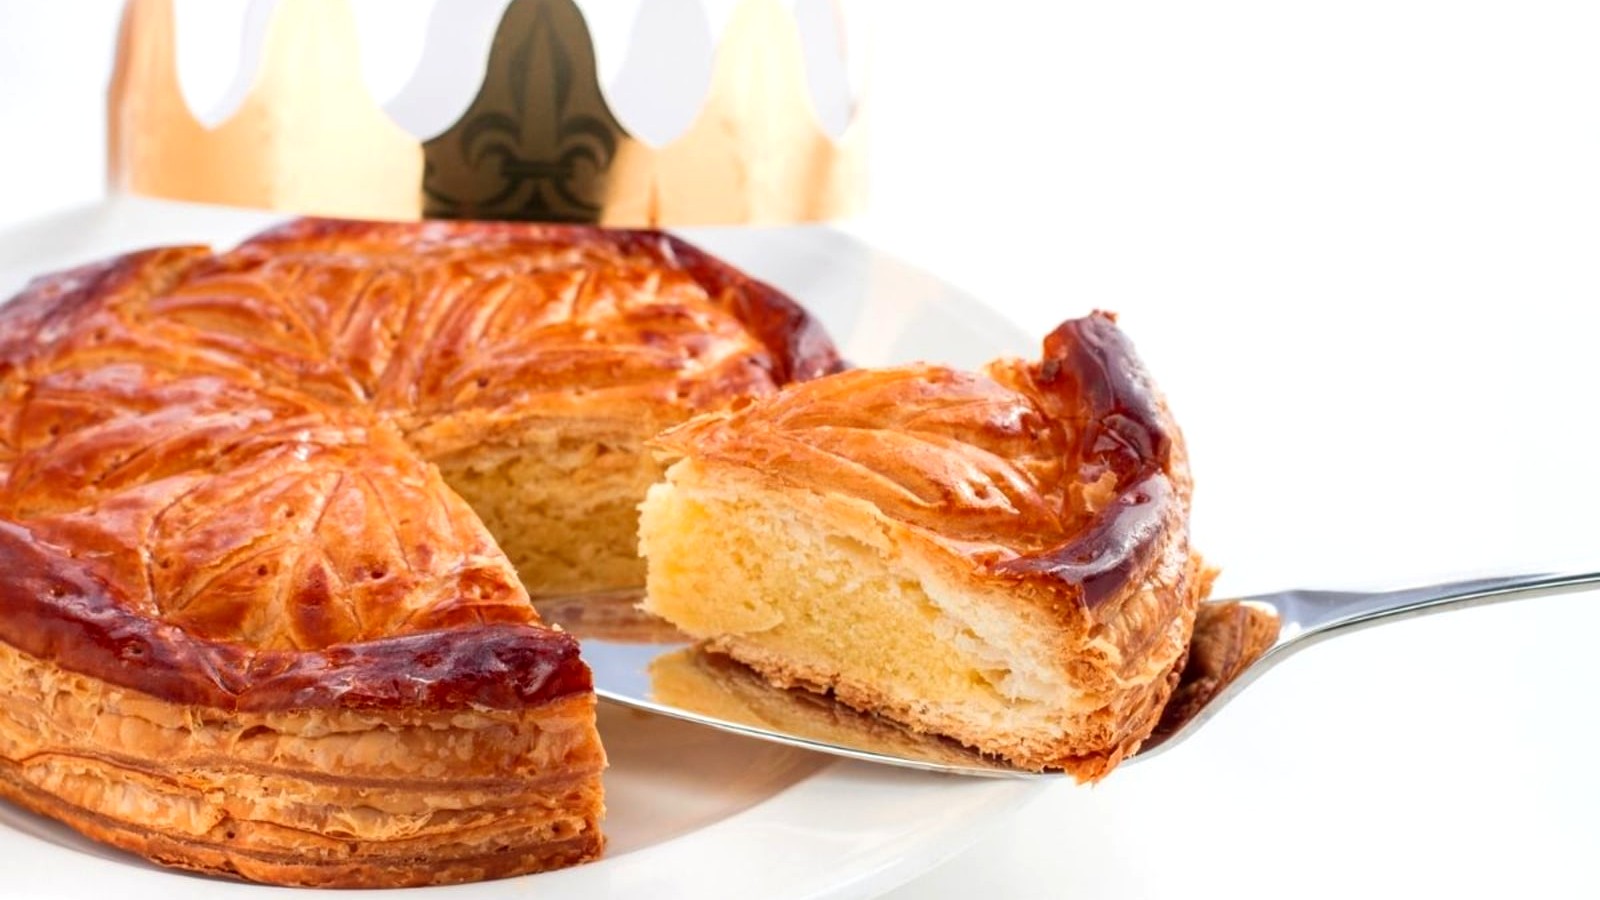 Image of French Galette Filled with Almond Cream